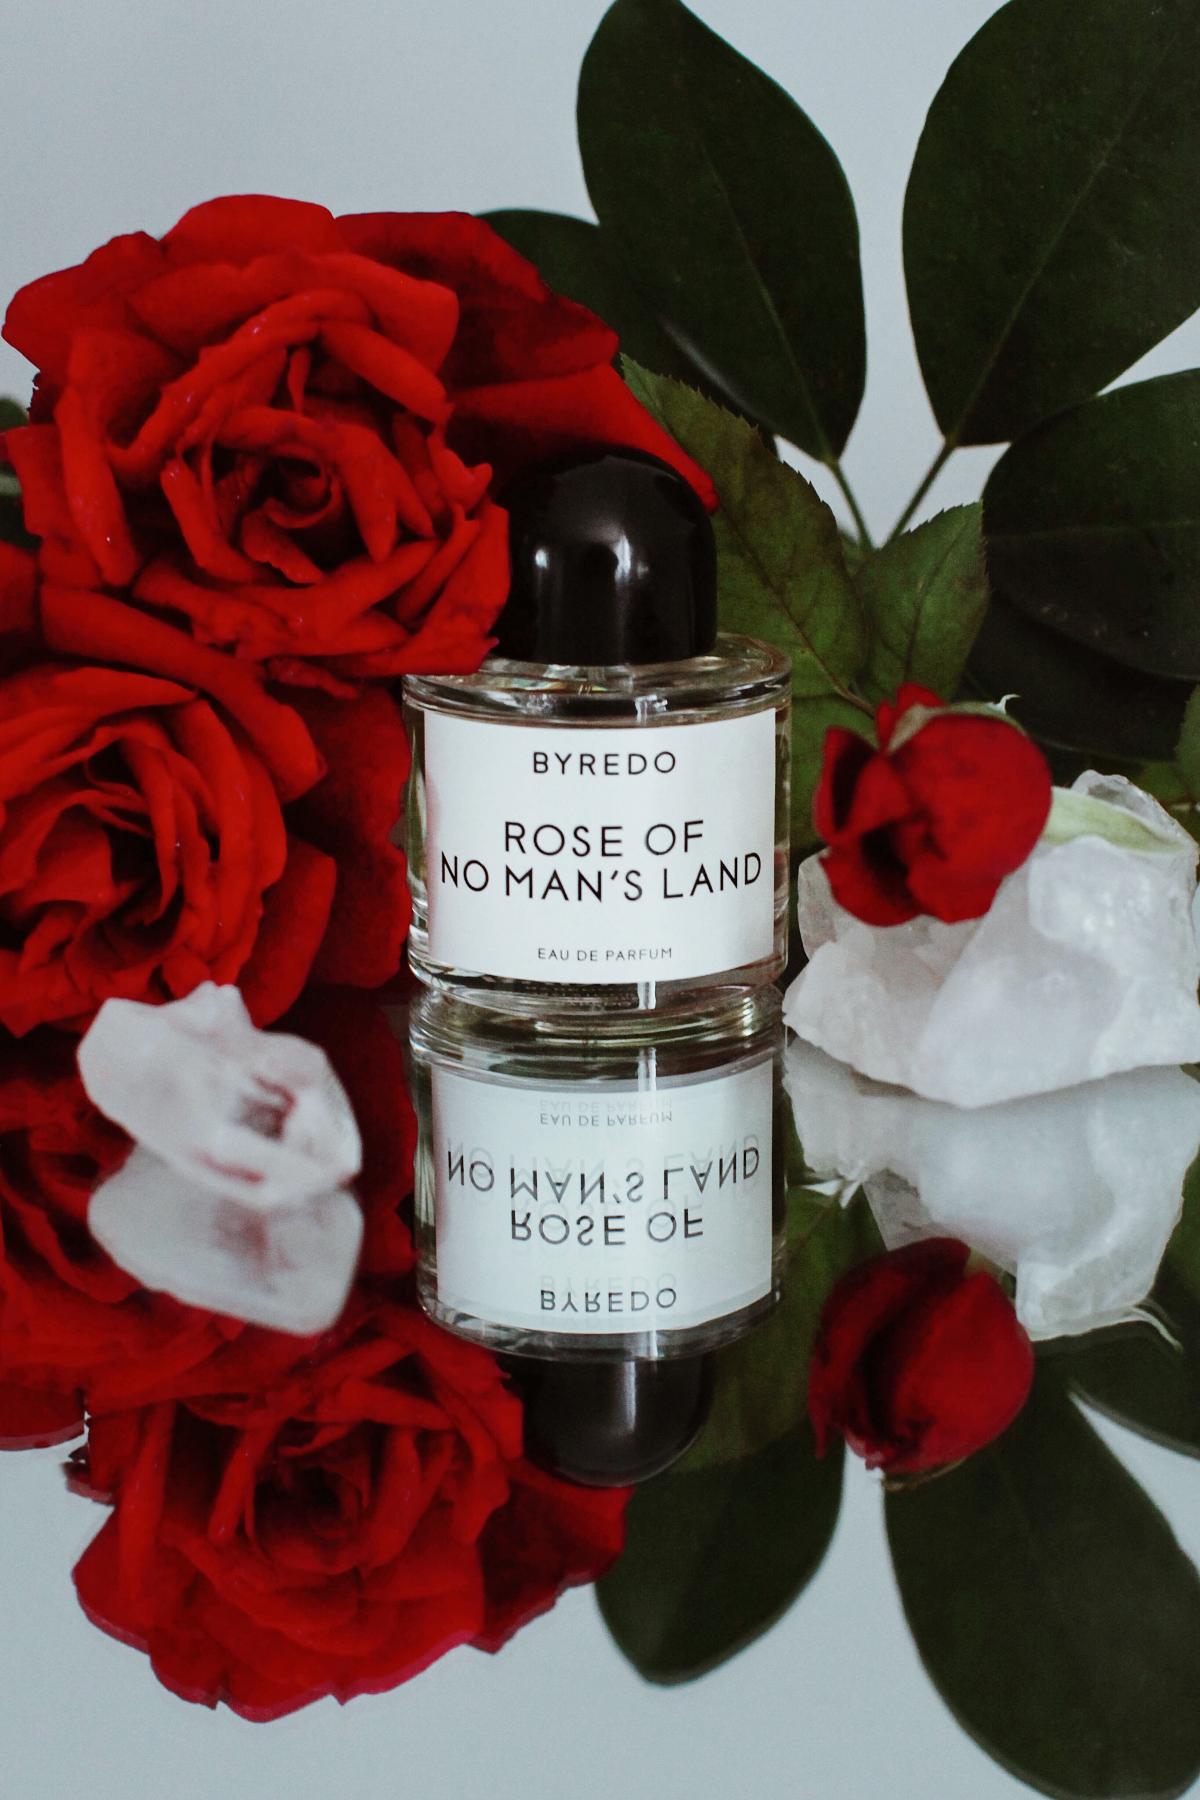 Rose Of No Man's Land Byredo perfume - a fragrance for women and men 2015